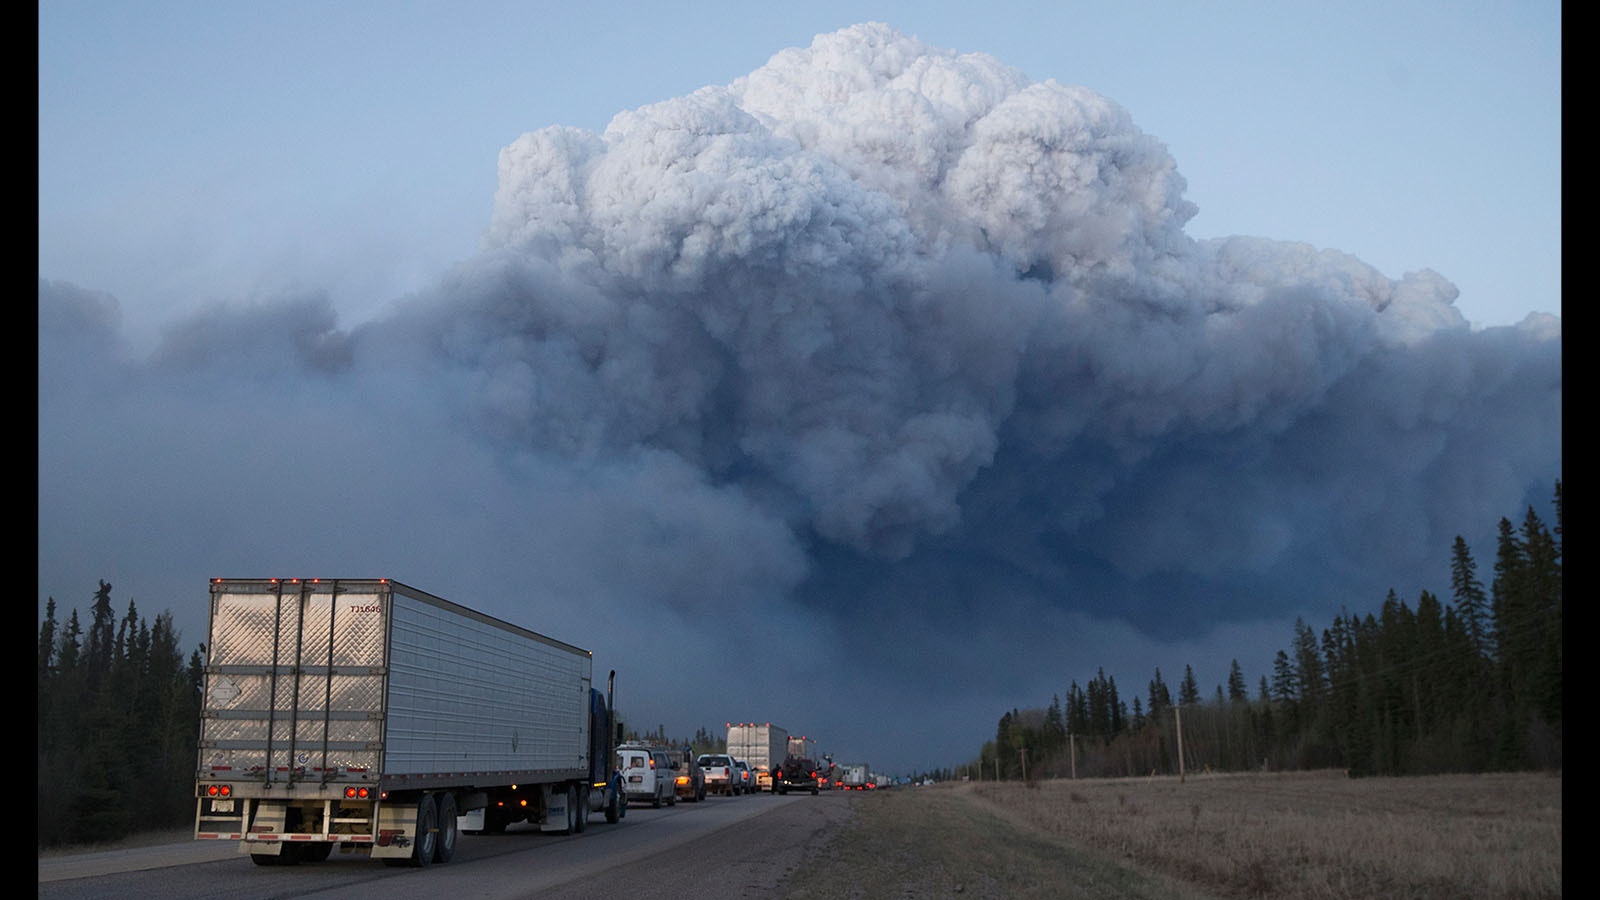 Drivers wait for clearance to take firefighting supplies into town outside of Fort McMurray, Alberta. Wildfires burning out of control forced the evacuation of more than 80,000 residents from the town.